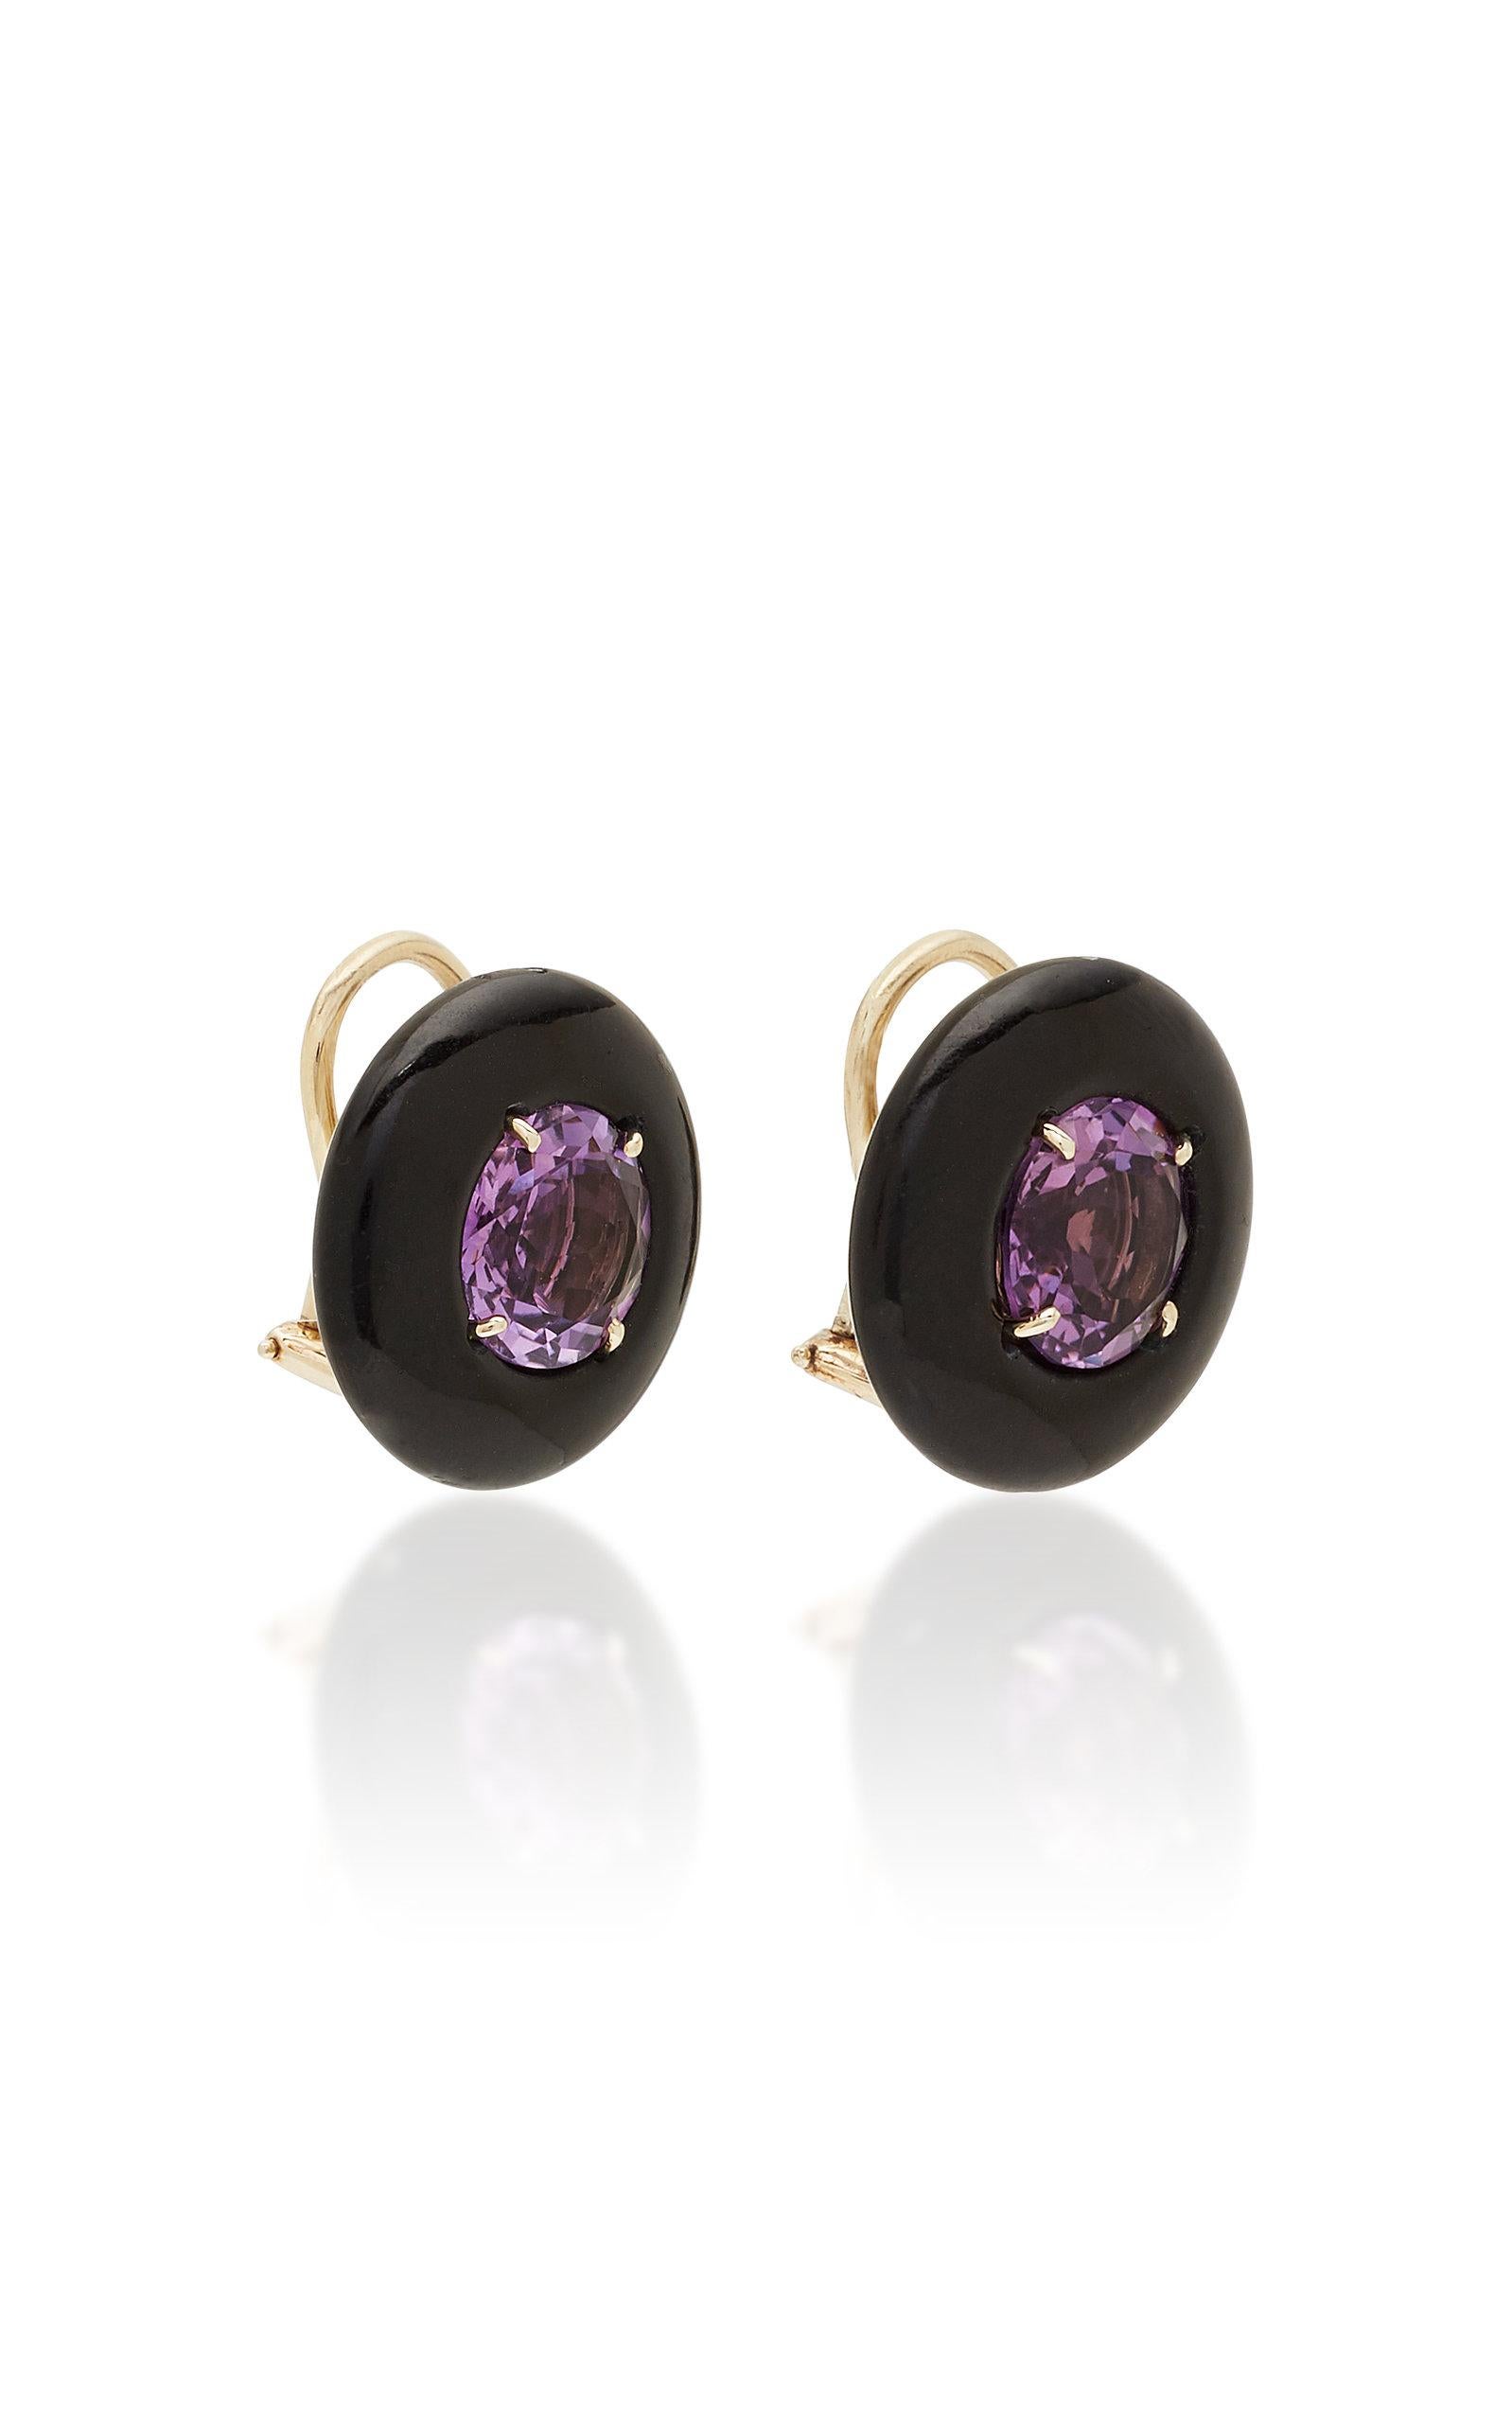 A pair of 20mm rounded black Onyx button clip-on Earrings with a faceted round Amethyst center. Set in 18 karat white gold , signed Sorab & Roshi.
Am=6.75 cts.

3/4